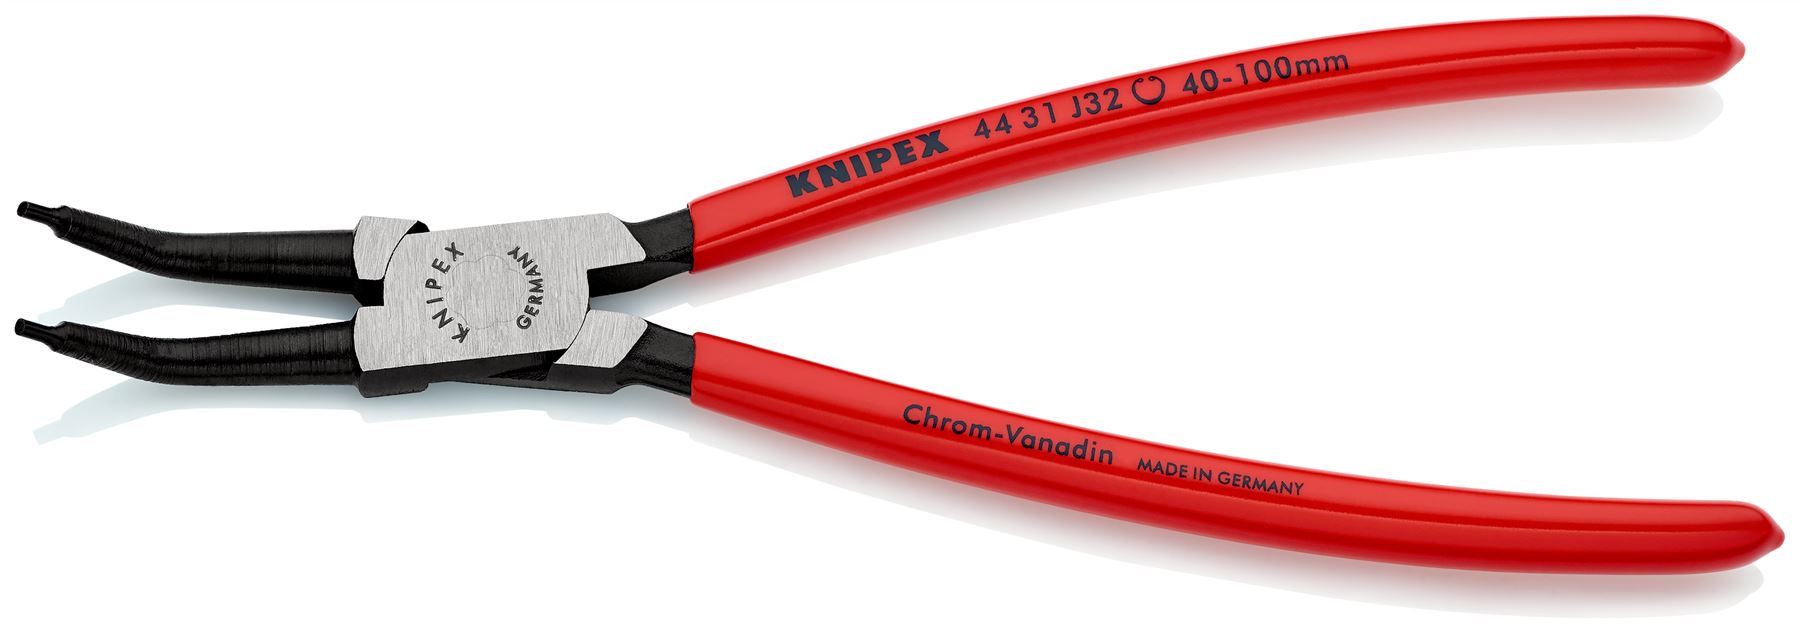 KNIPEX Circlip Pliers for Internal Circlips in Bore Holes 45° Angled 225mm 2.3mm Diameter Tips 44 31 J32